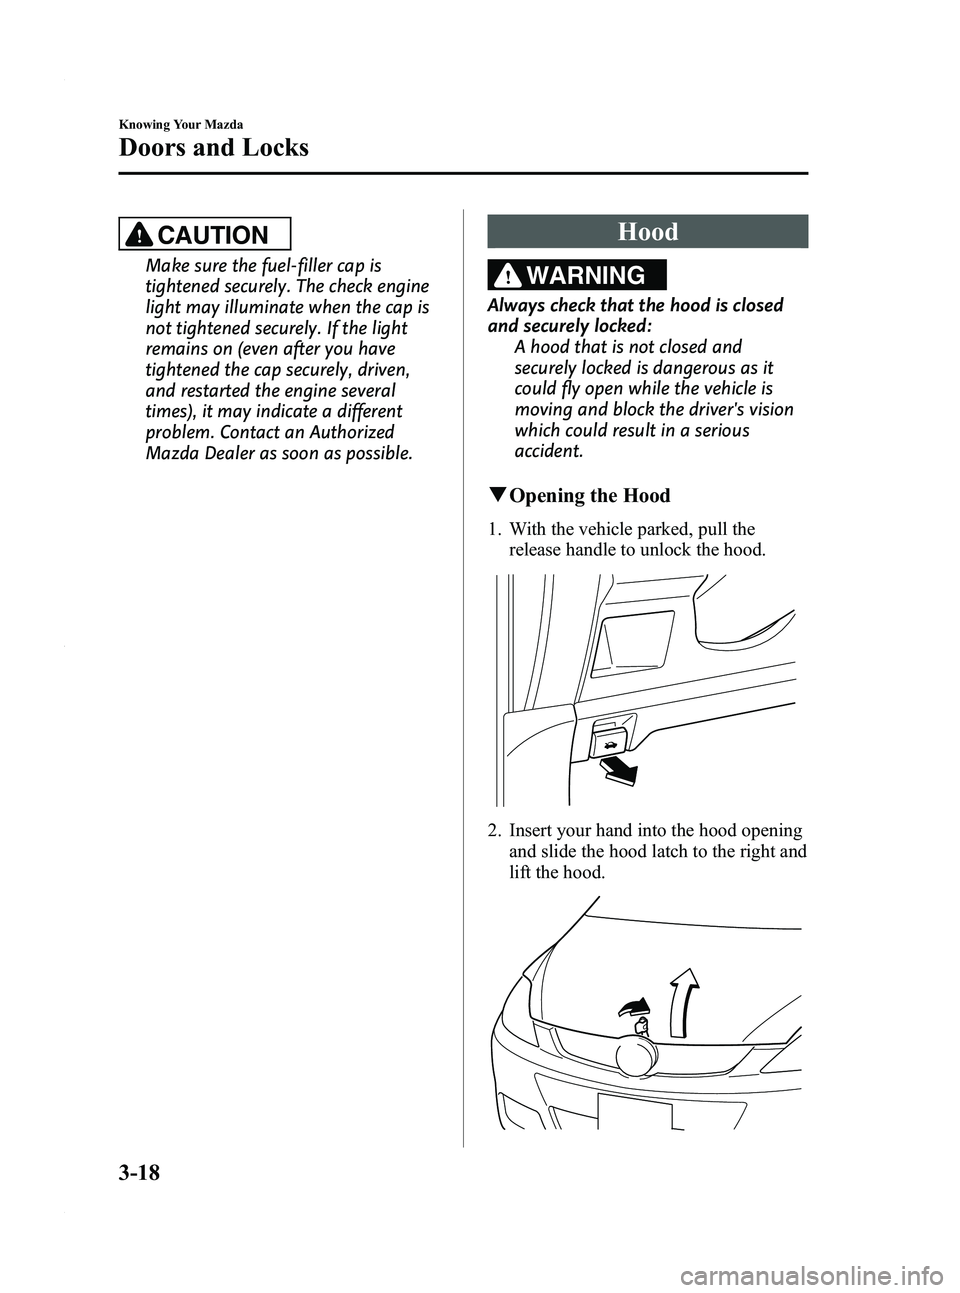 MAZDA MODEL 5 2010  Owners Manual Black plate (84,1)
CAUTION
Make sure the fuel-filler cap is
tightened securely. The check engine
light may illuminate when the cap is
not tightened securely. If the light
remains on (even after you ha